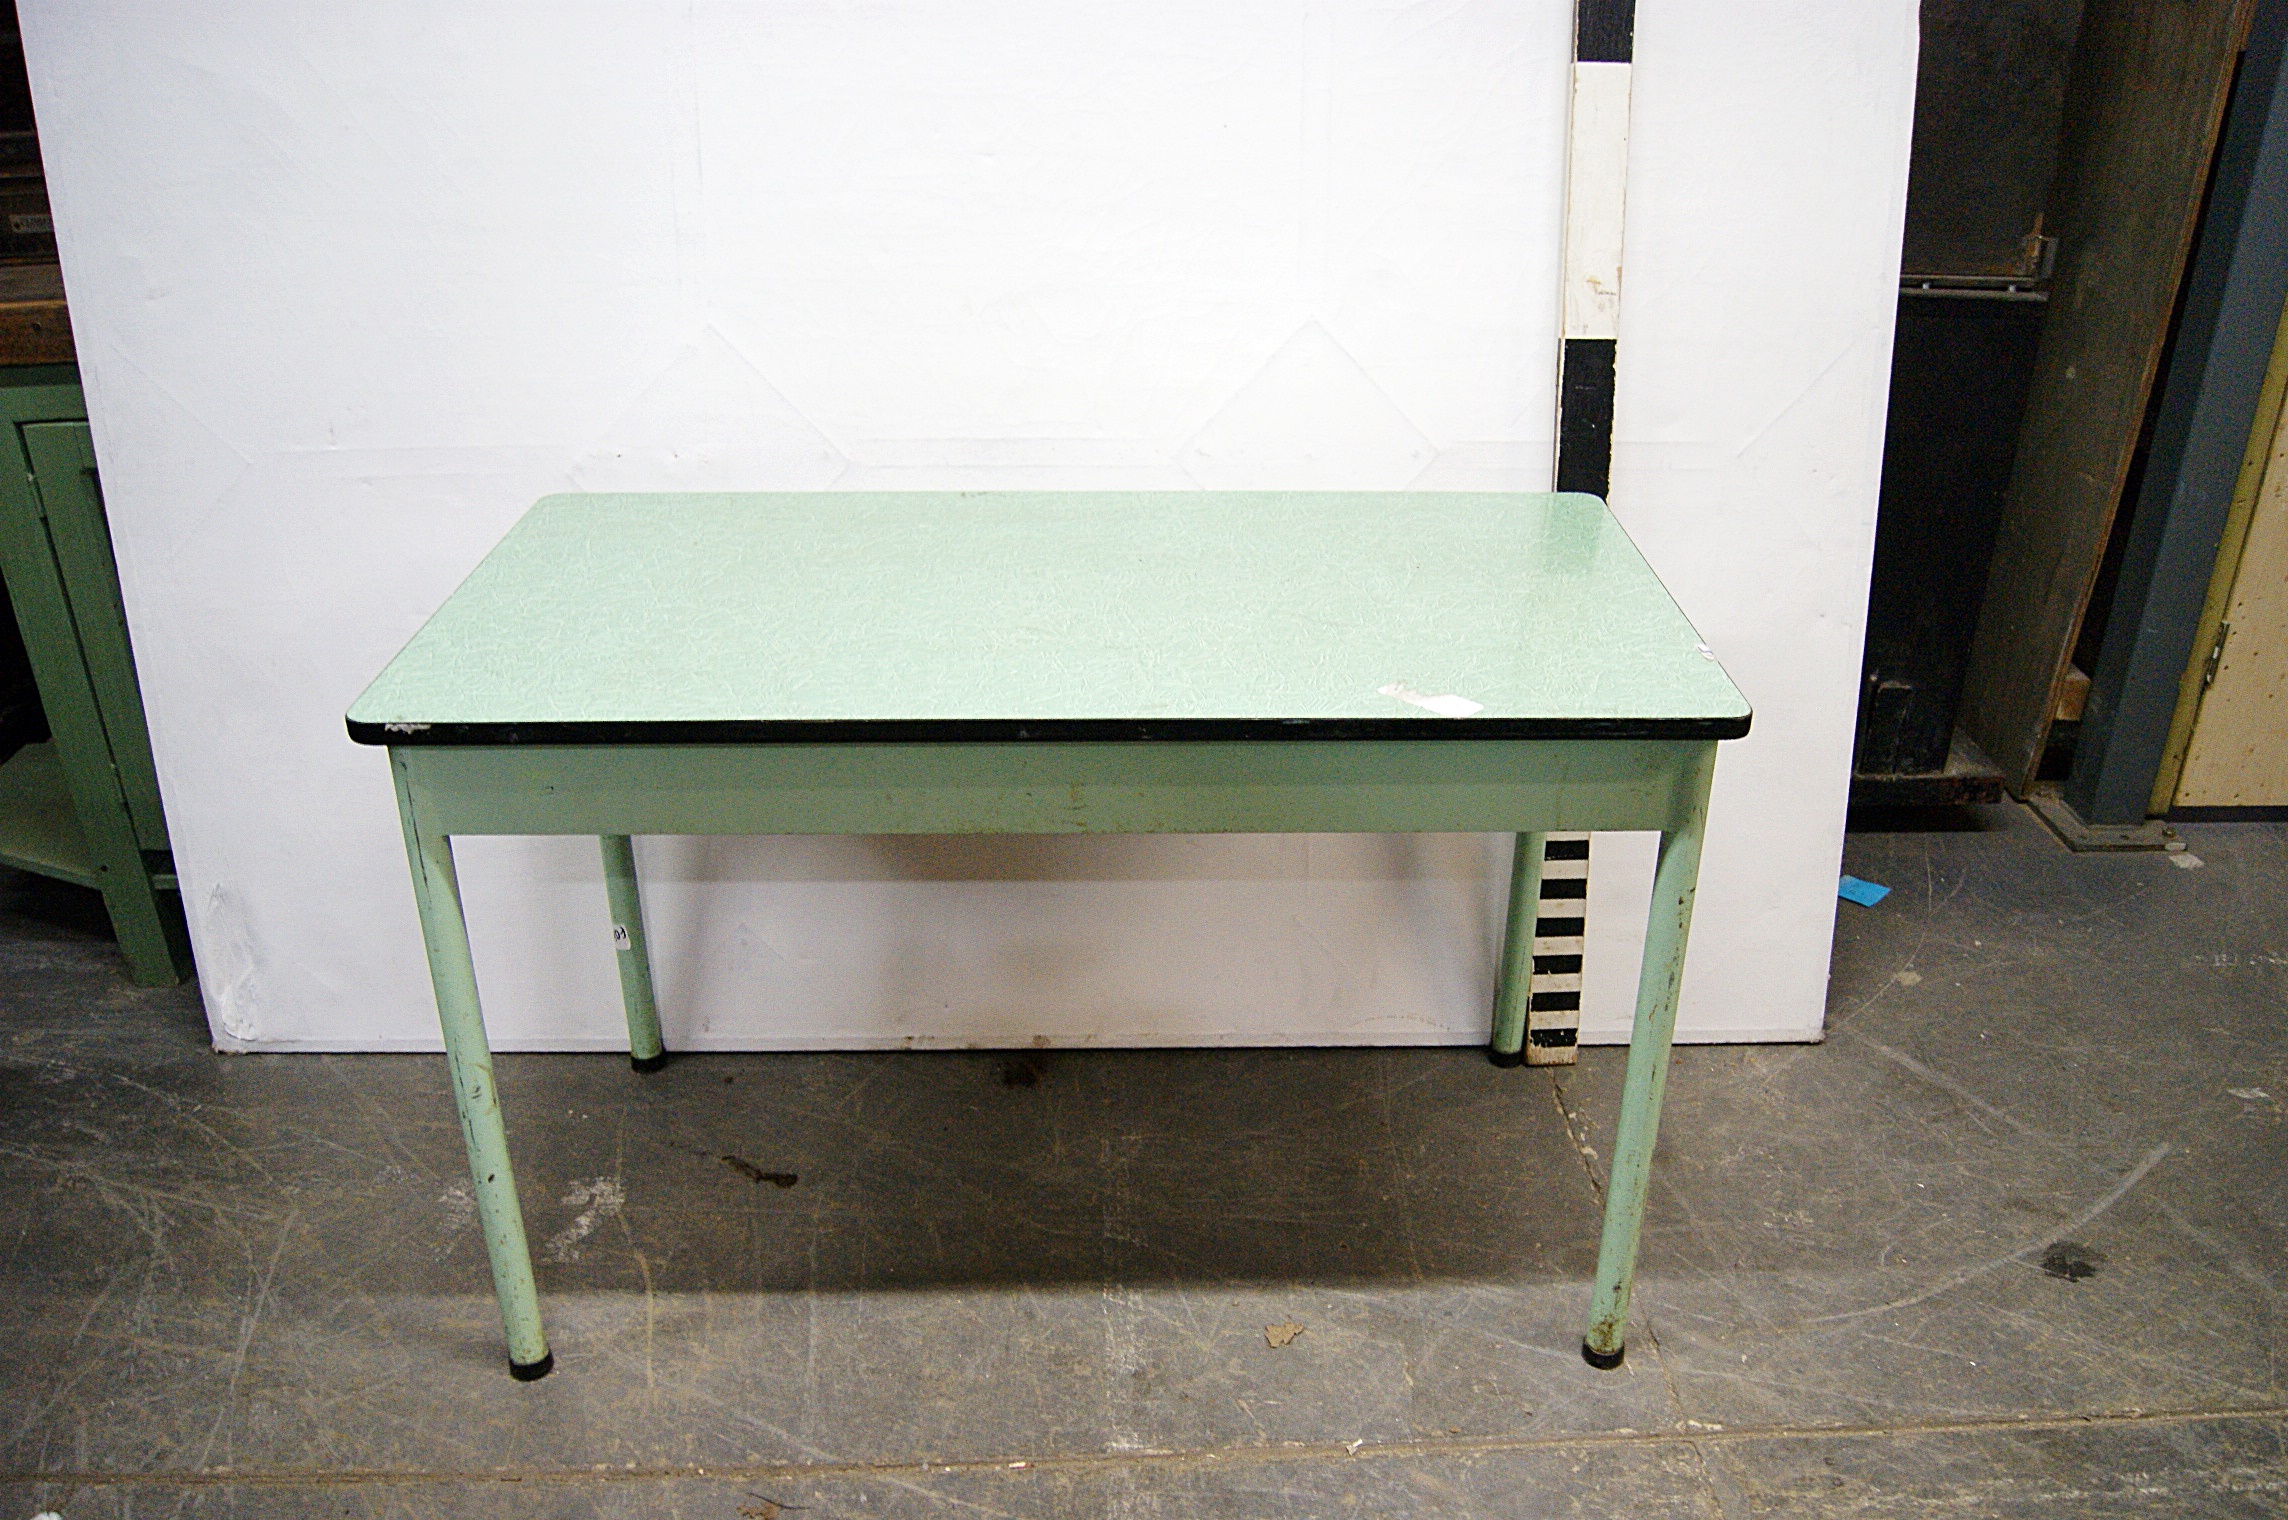 1180129 Green Formica Top Kitchen Table H 75cm X 120 X 64 Stockyard Prop And Backdrop Hire